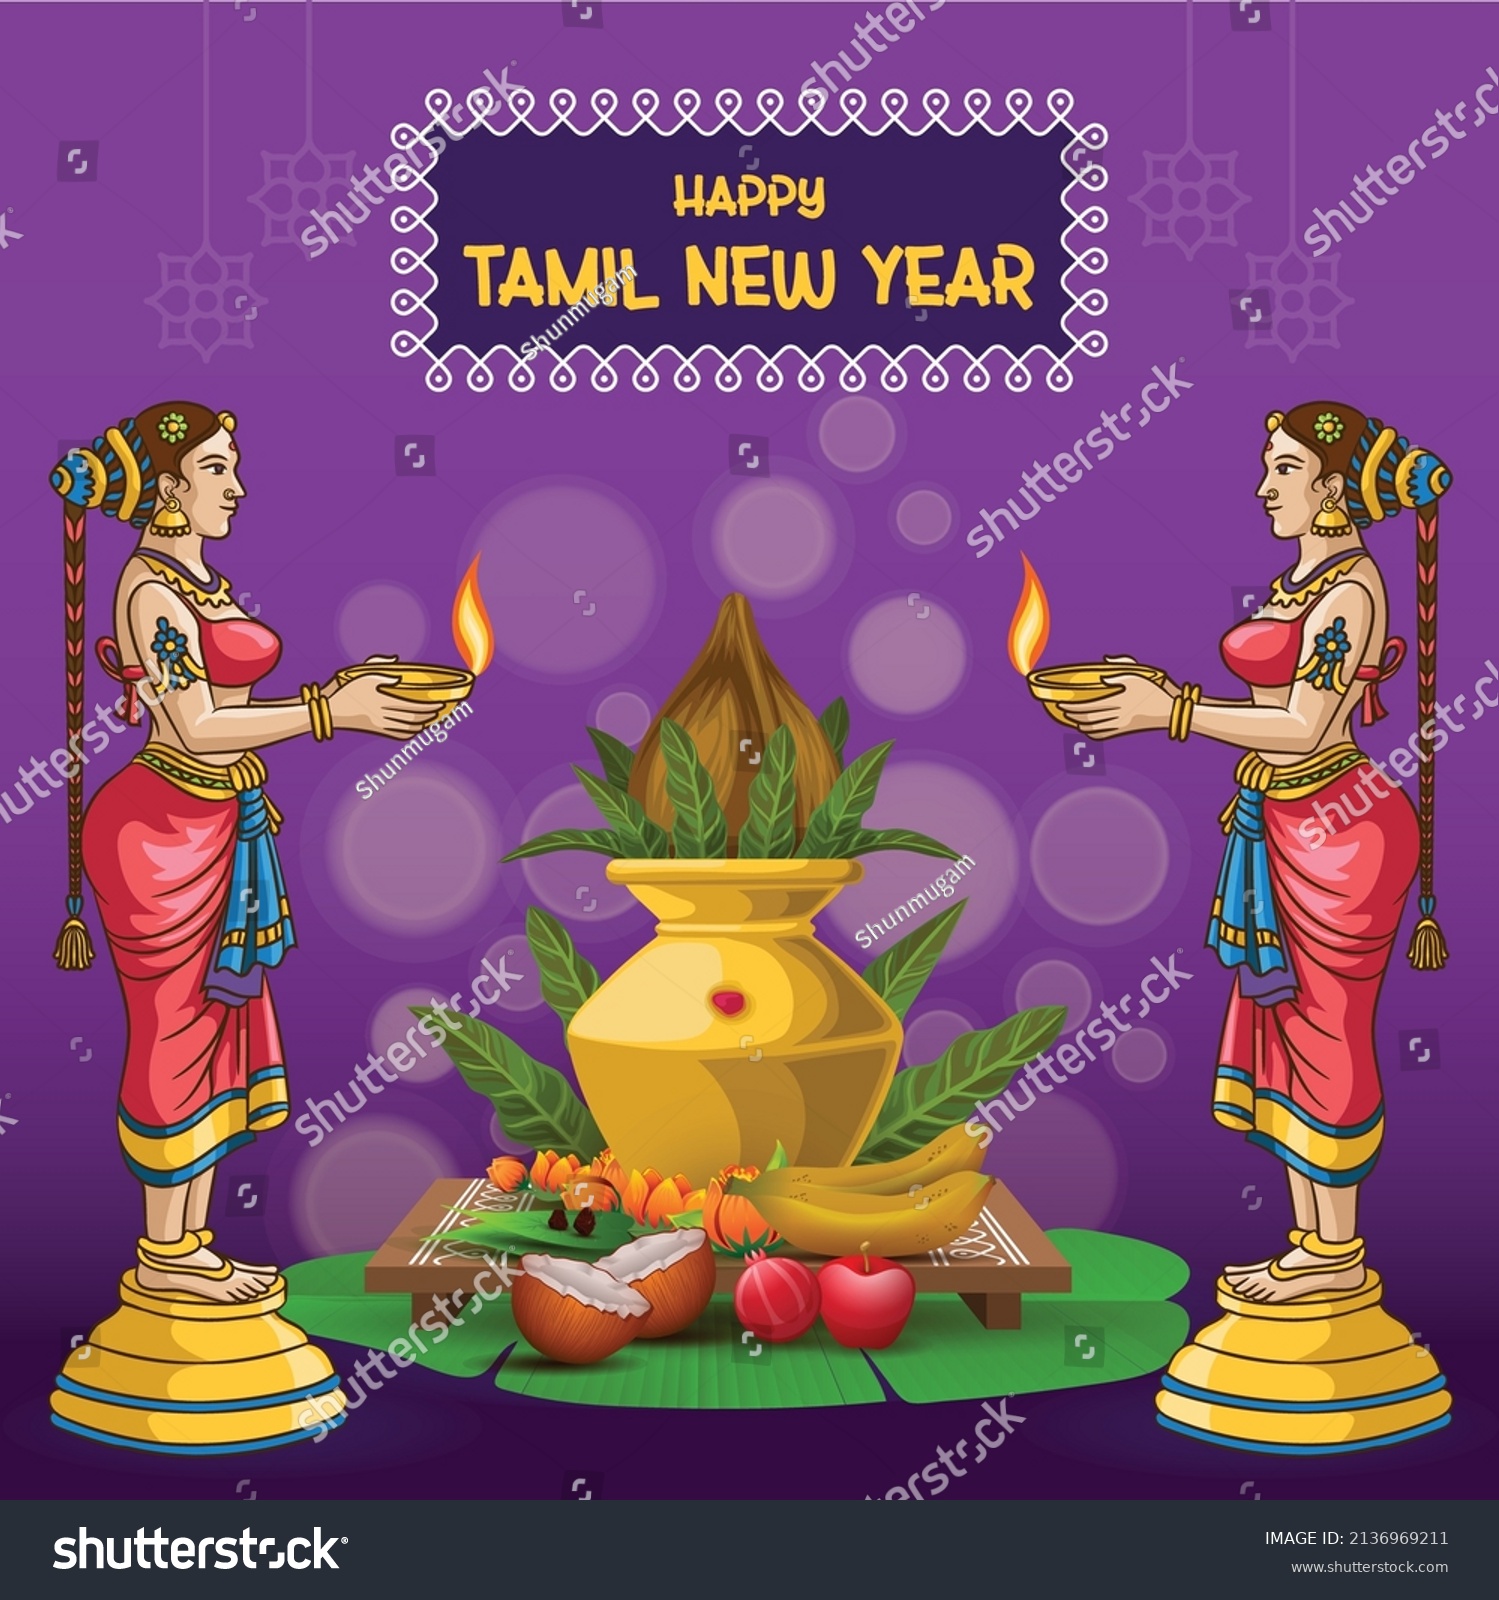 Happy Tamil New Year Greetings Girl Stock Vector Royalty Free